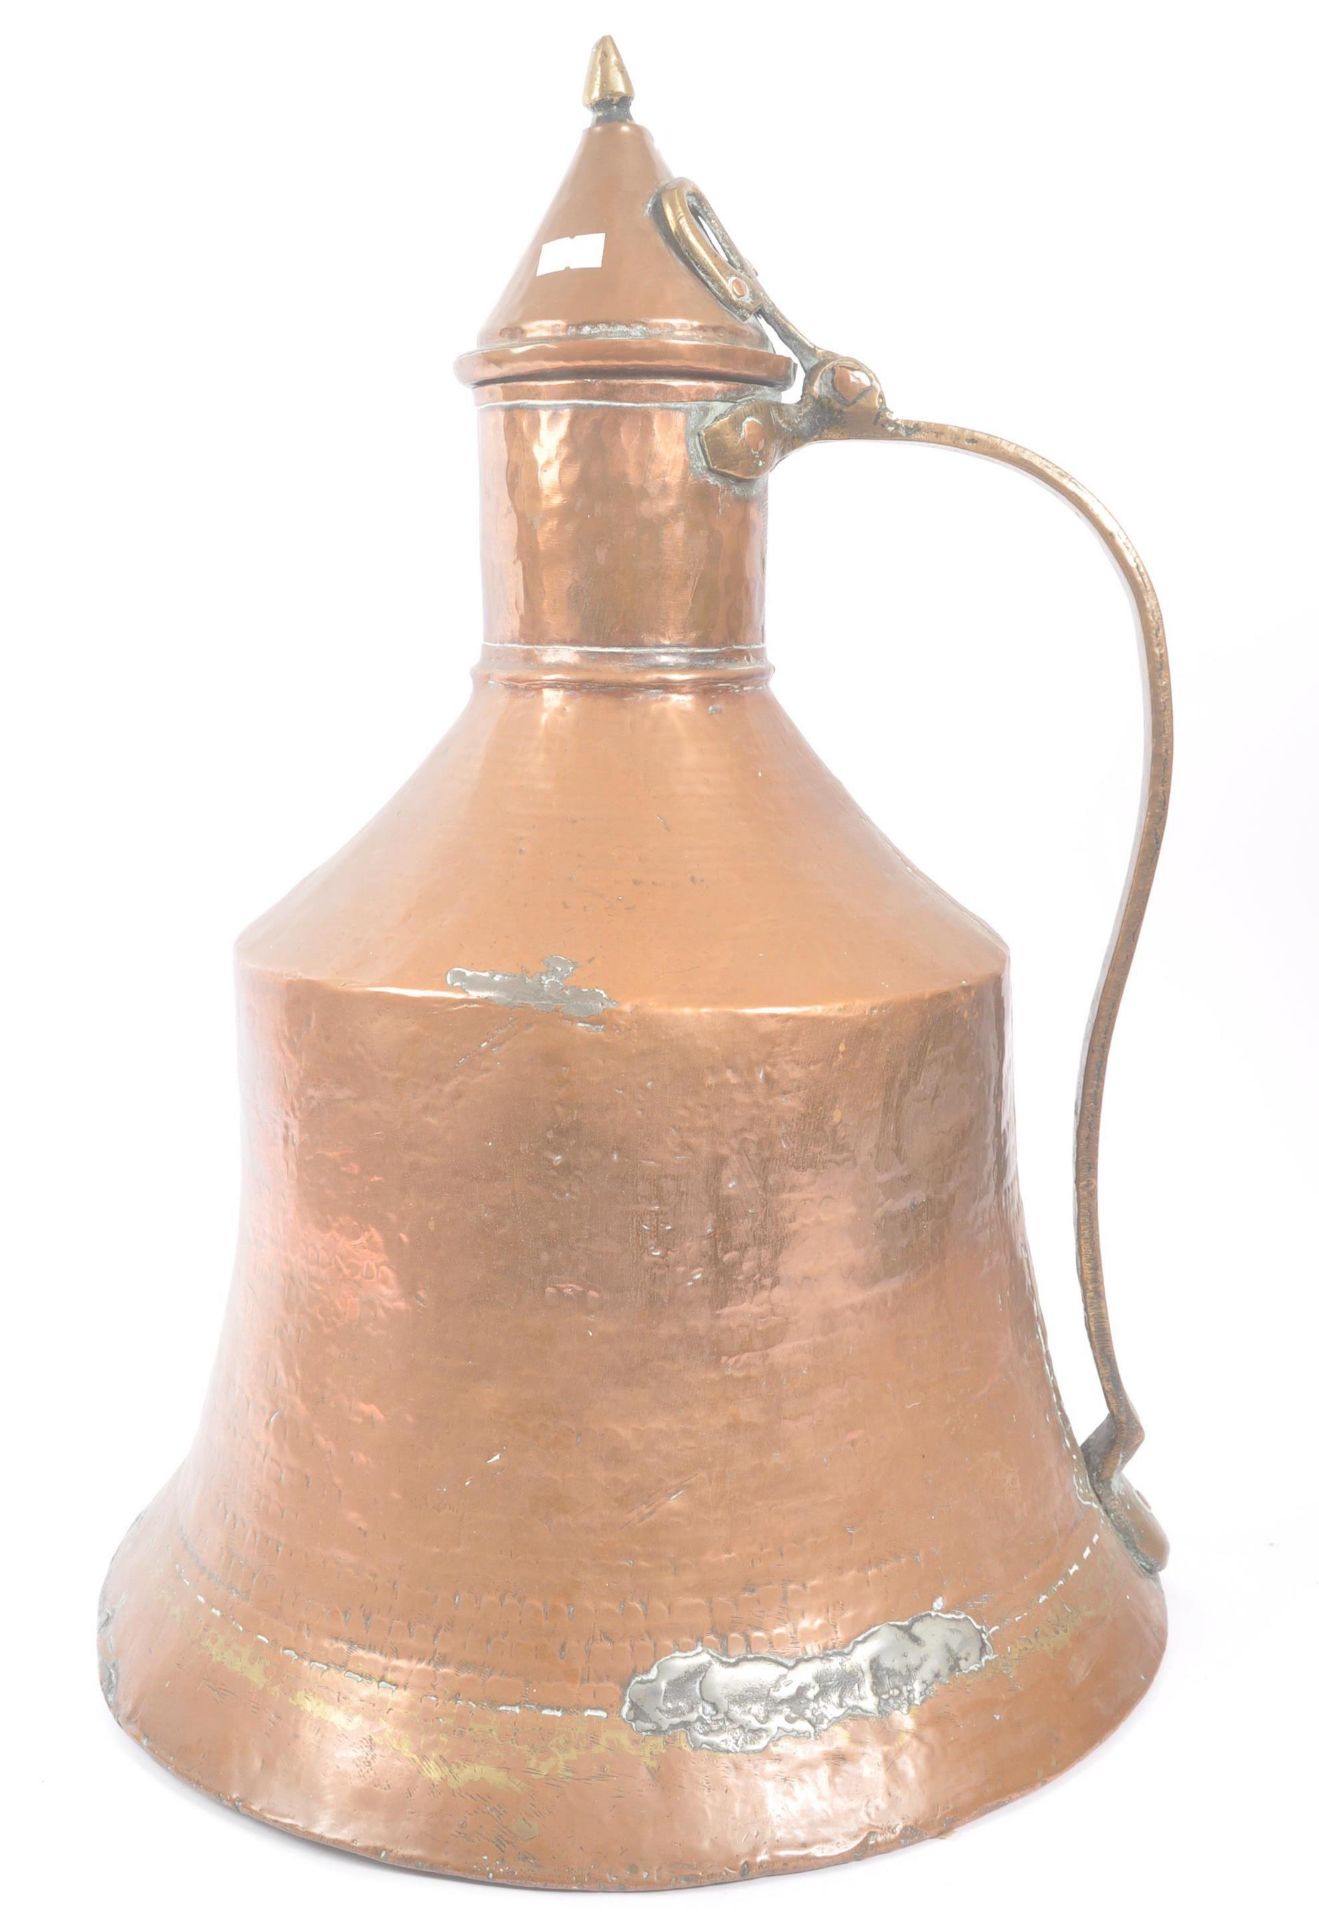 LARGE 19TH CENTURY HAMMERED COPPER EWER